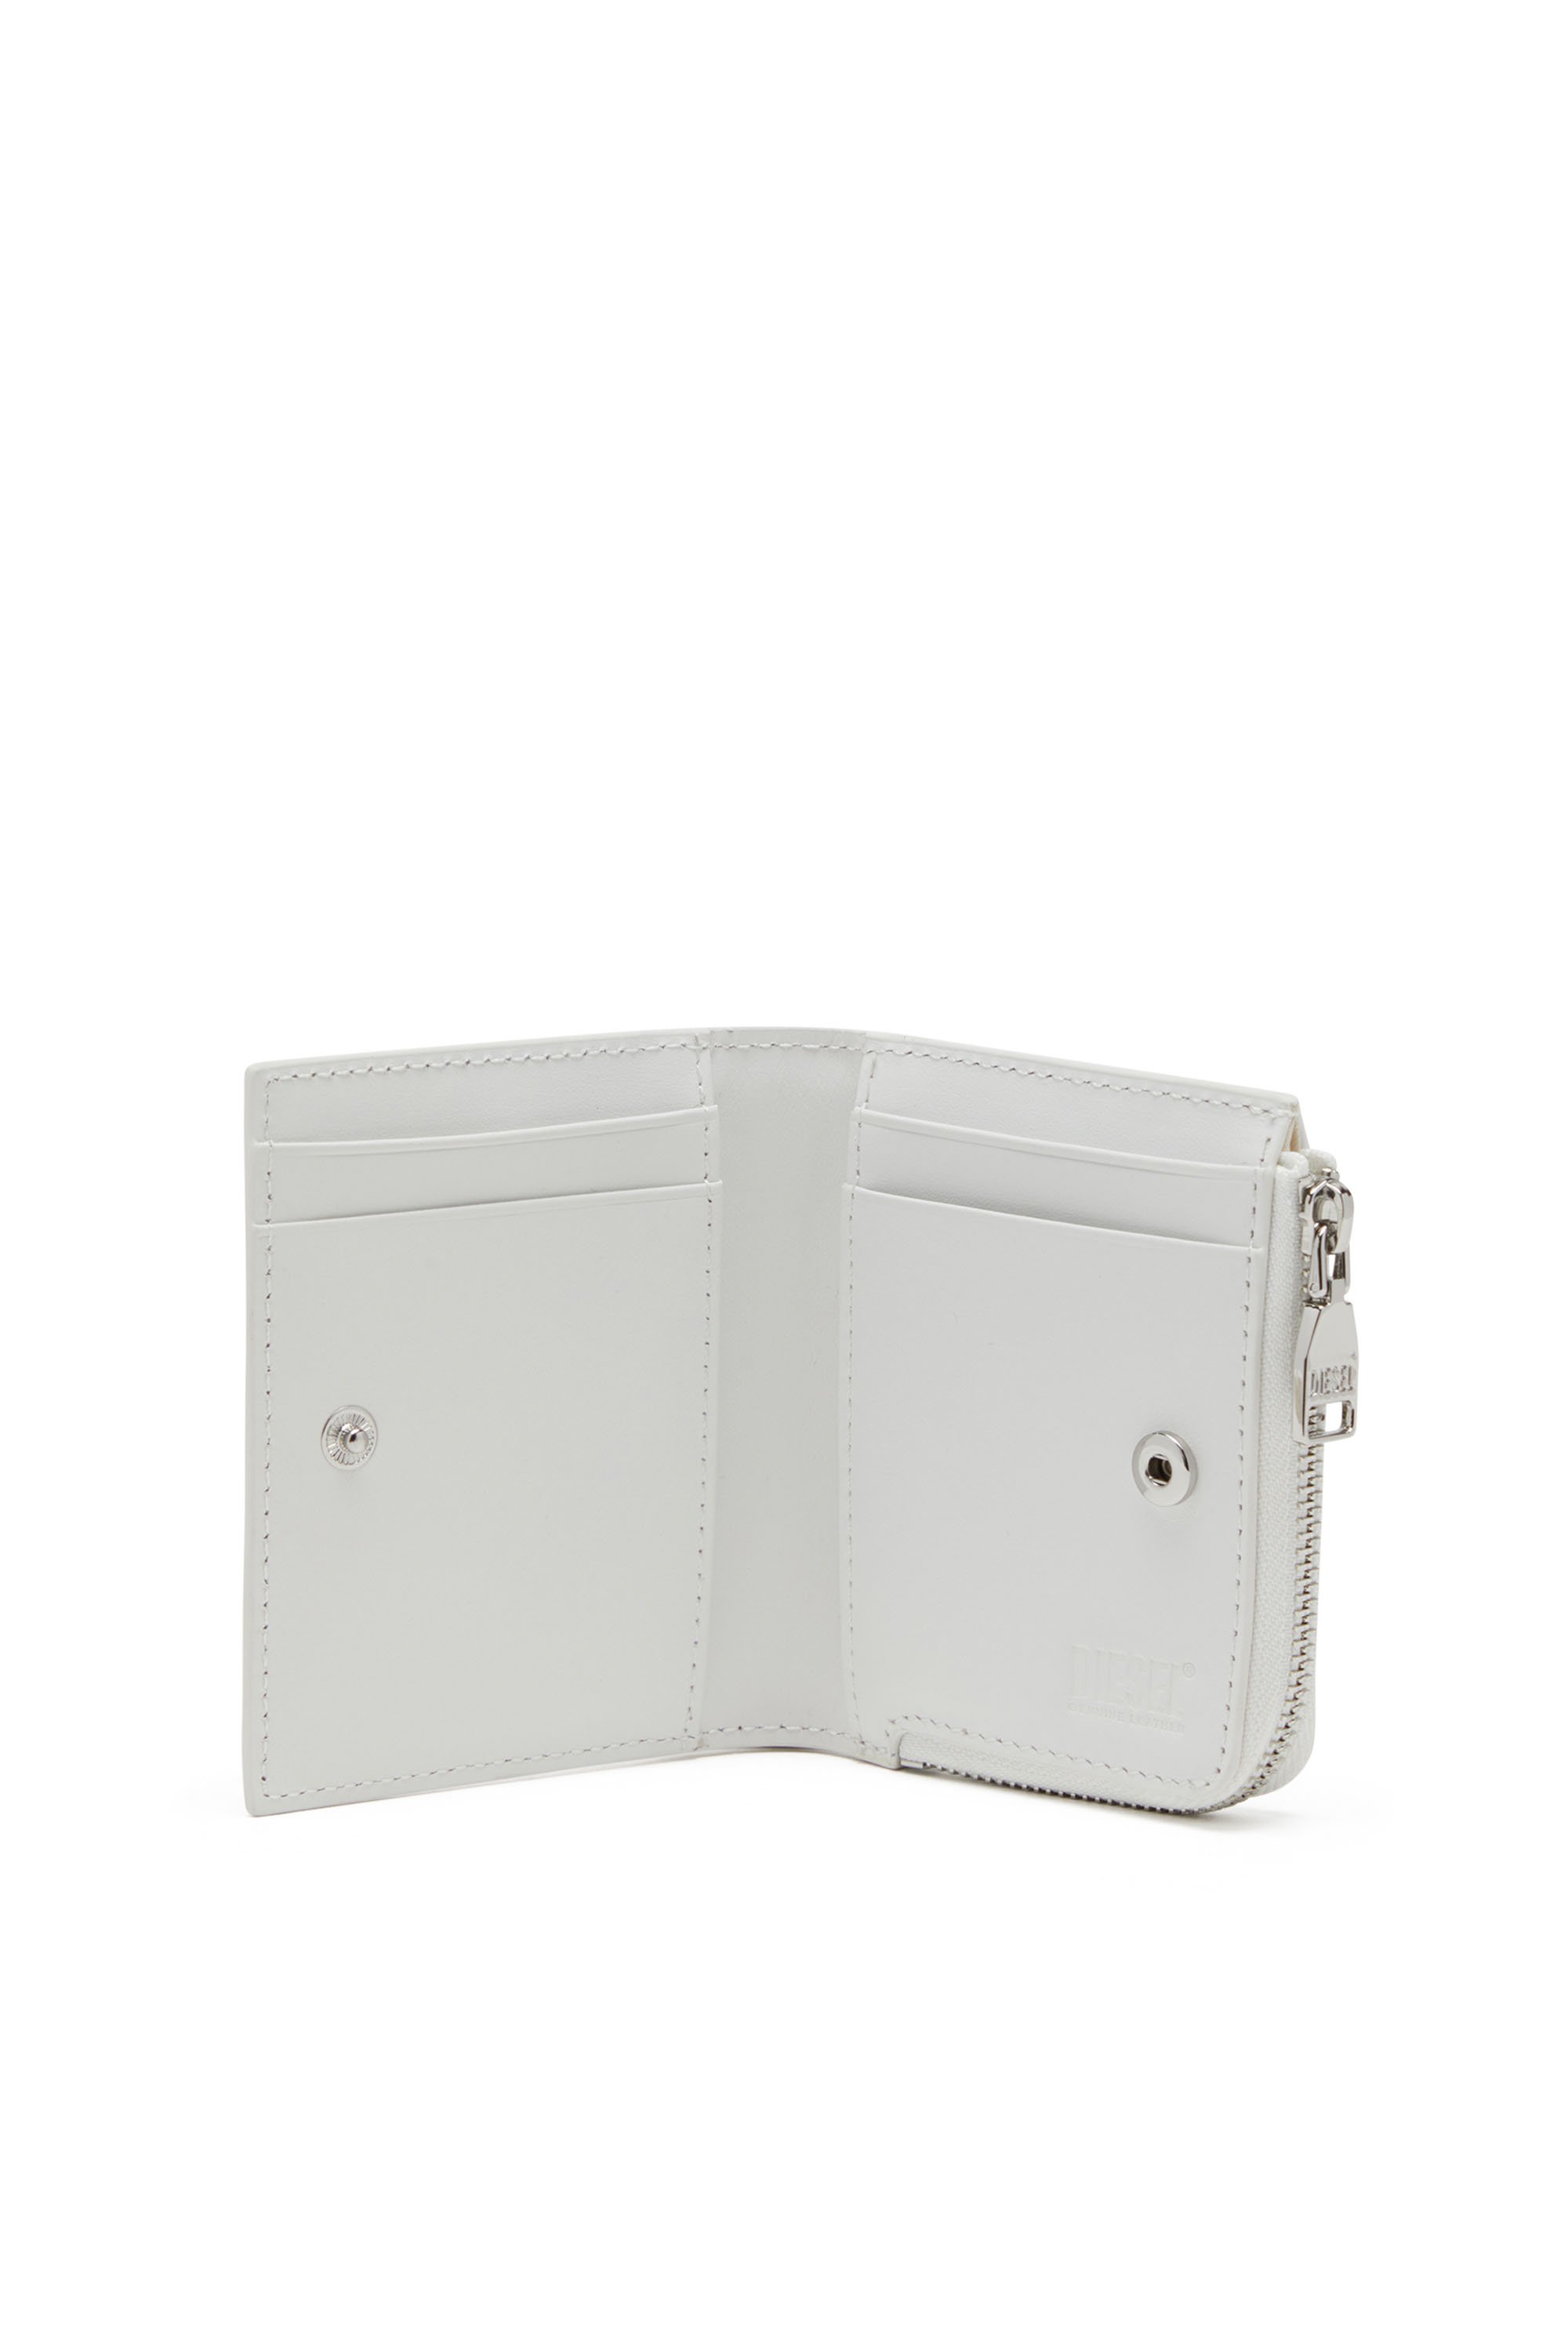 Diesel - 1DR CARD HOLDER ZIP L, Woman Bi-fold card holder in nappa leather in White - Image 3